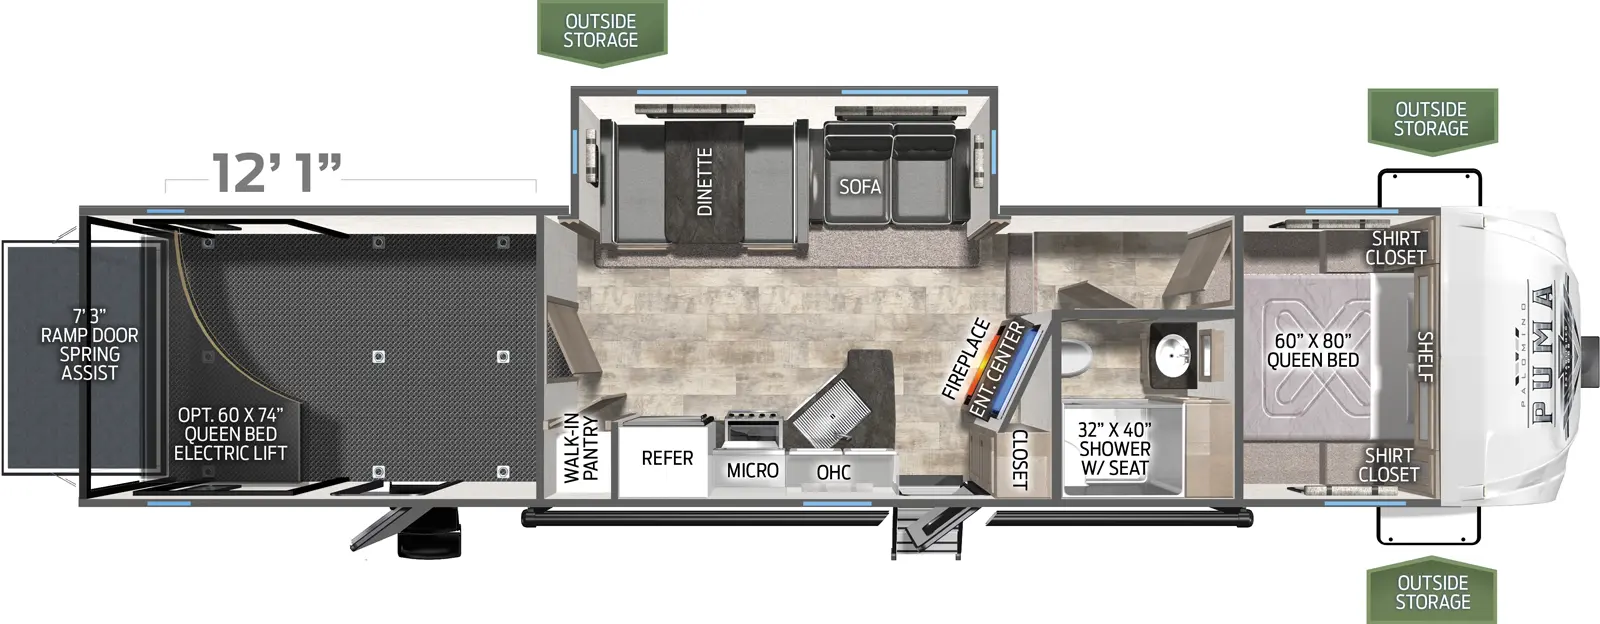 The 382THS has one slide out on the off door side. Exterior features include a 21 foot awning and two entry doors. Interior layout from the front to back: front bedroom with queen bed; full bathroom; entertainment center and closet; kitchen and living area; slide out contains three cushion sofa and a booth dinette; kitchen contains a microwave, cooktop stove, refrigerator and a walk in pantry; cargo area includes two queen bunk bed electrical systems; ramp door.
